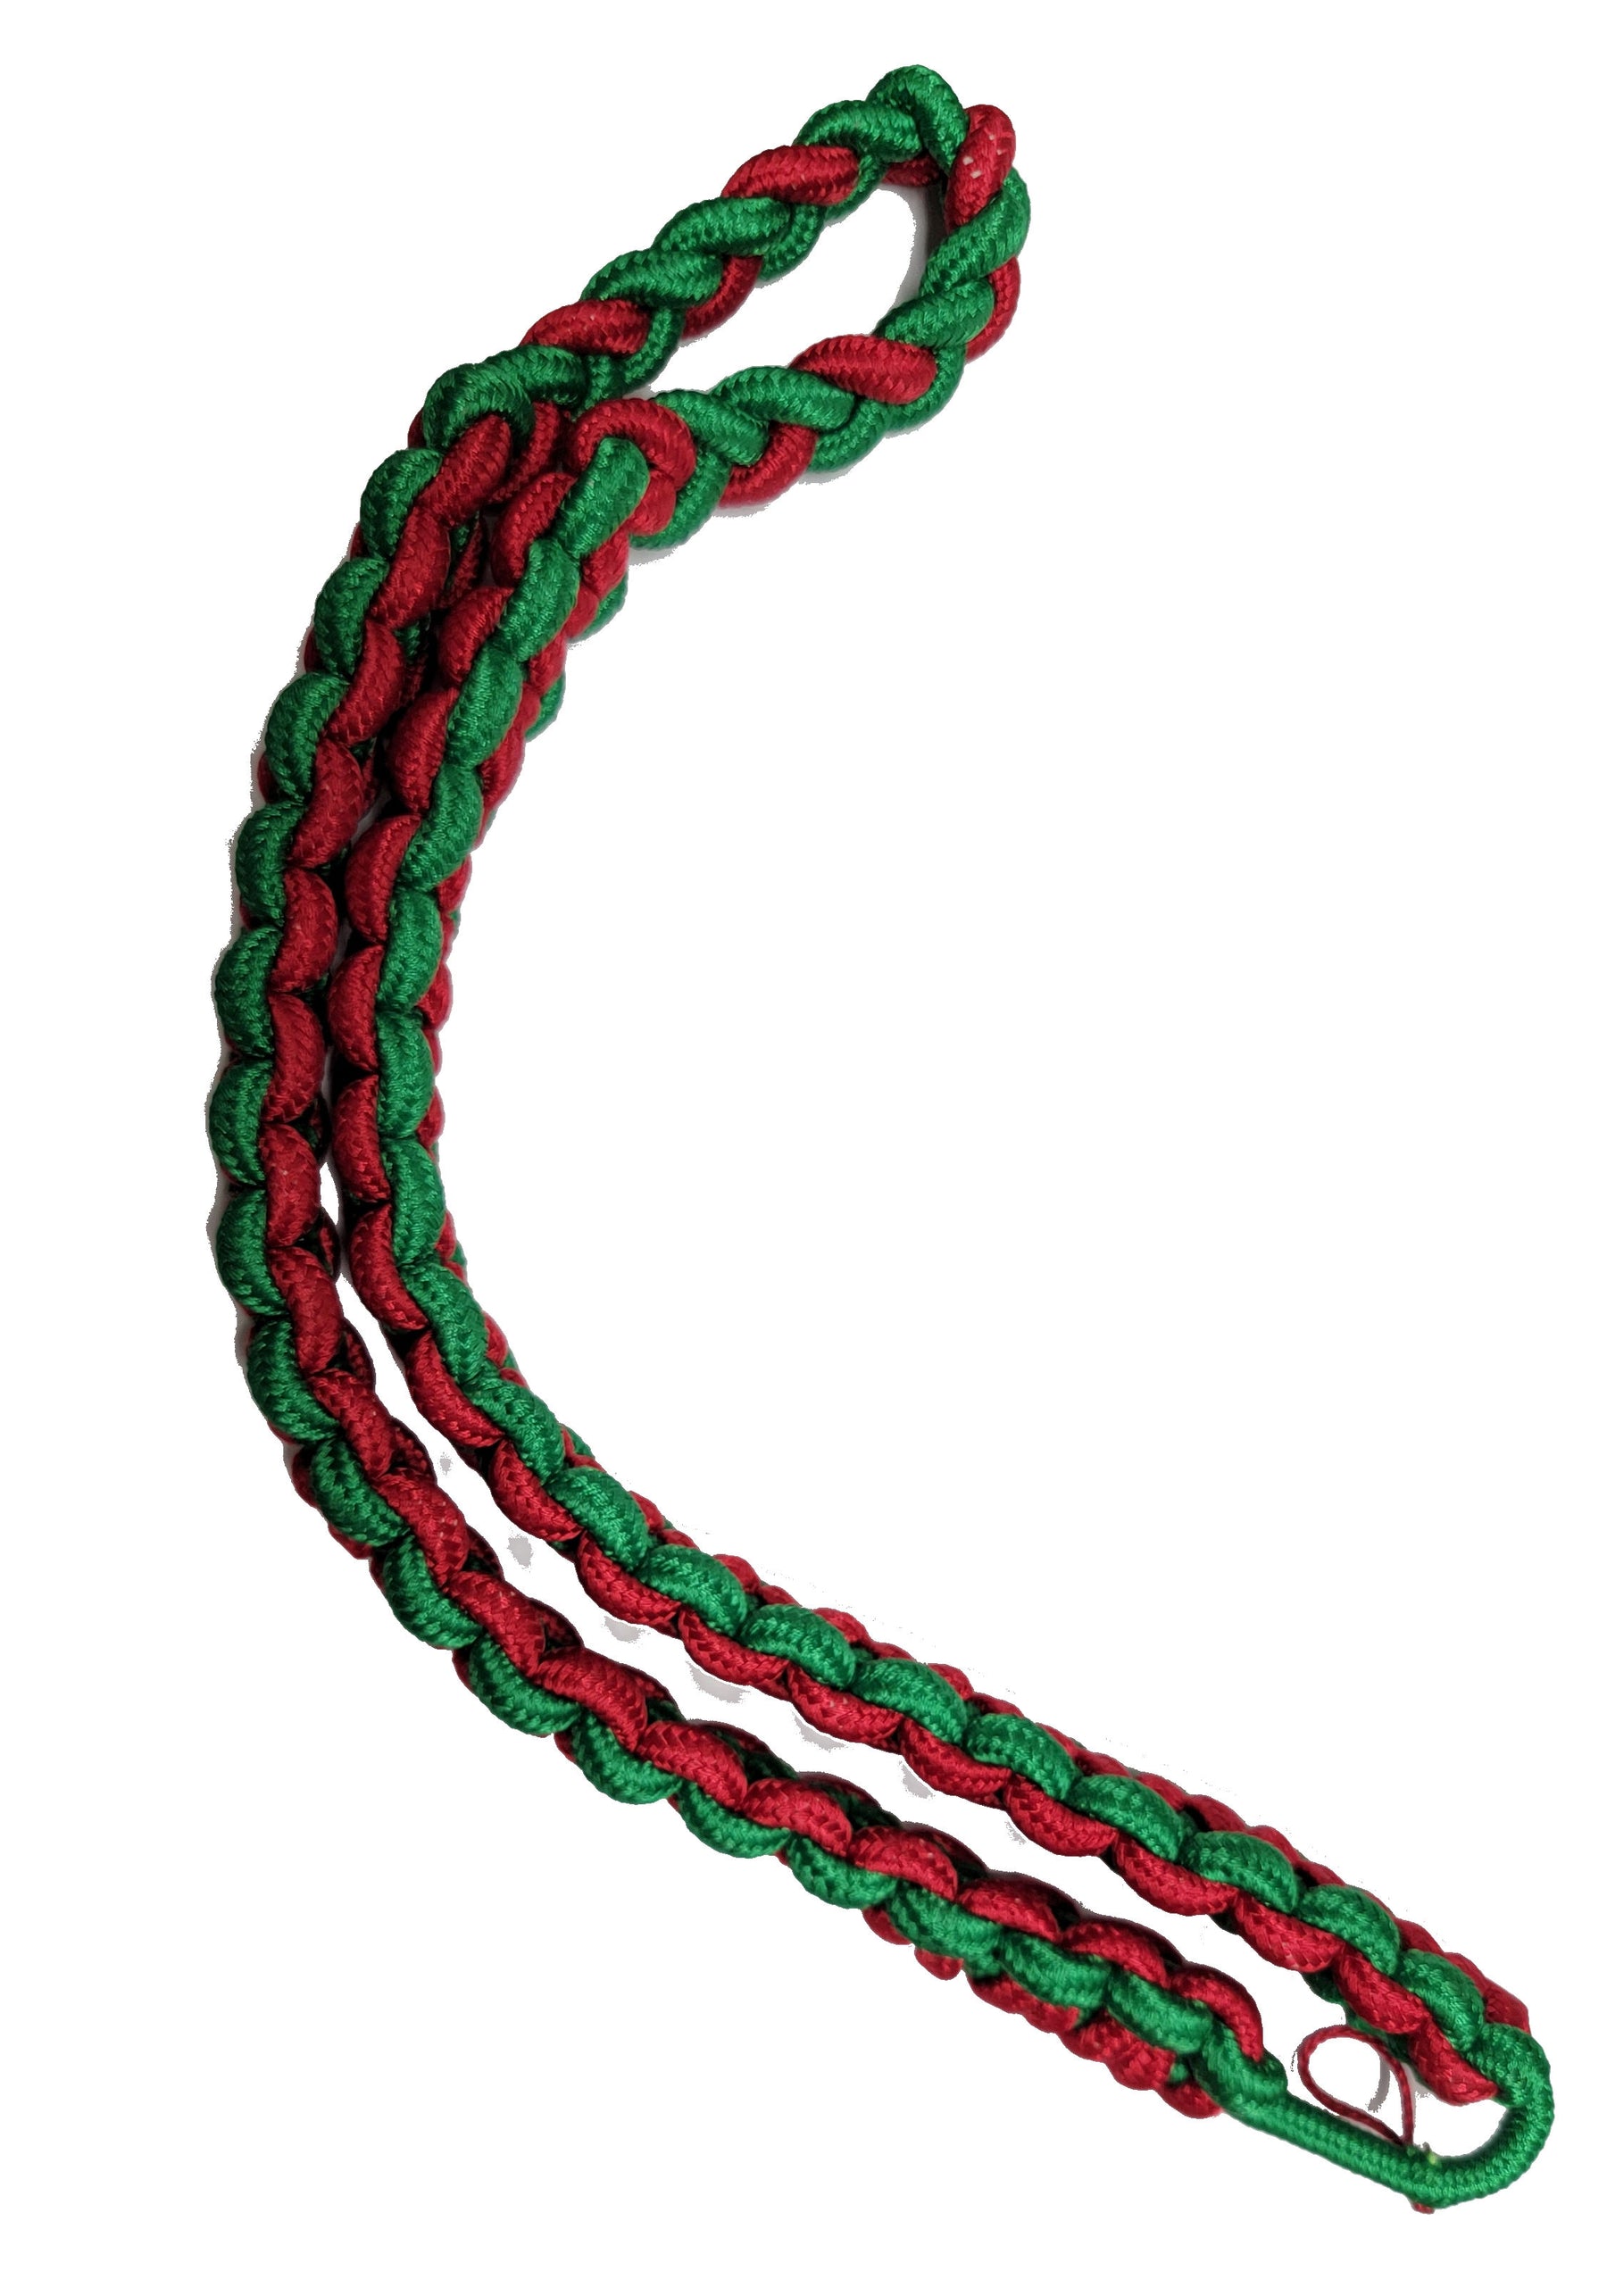 Single Braid Two Color Shoulder Cord - Red and Bright Green